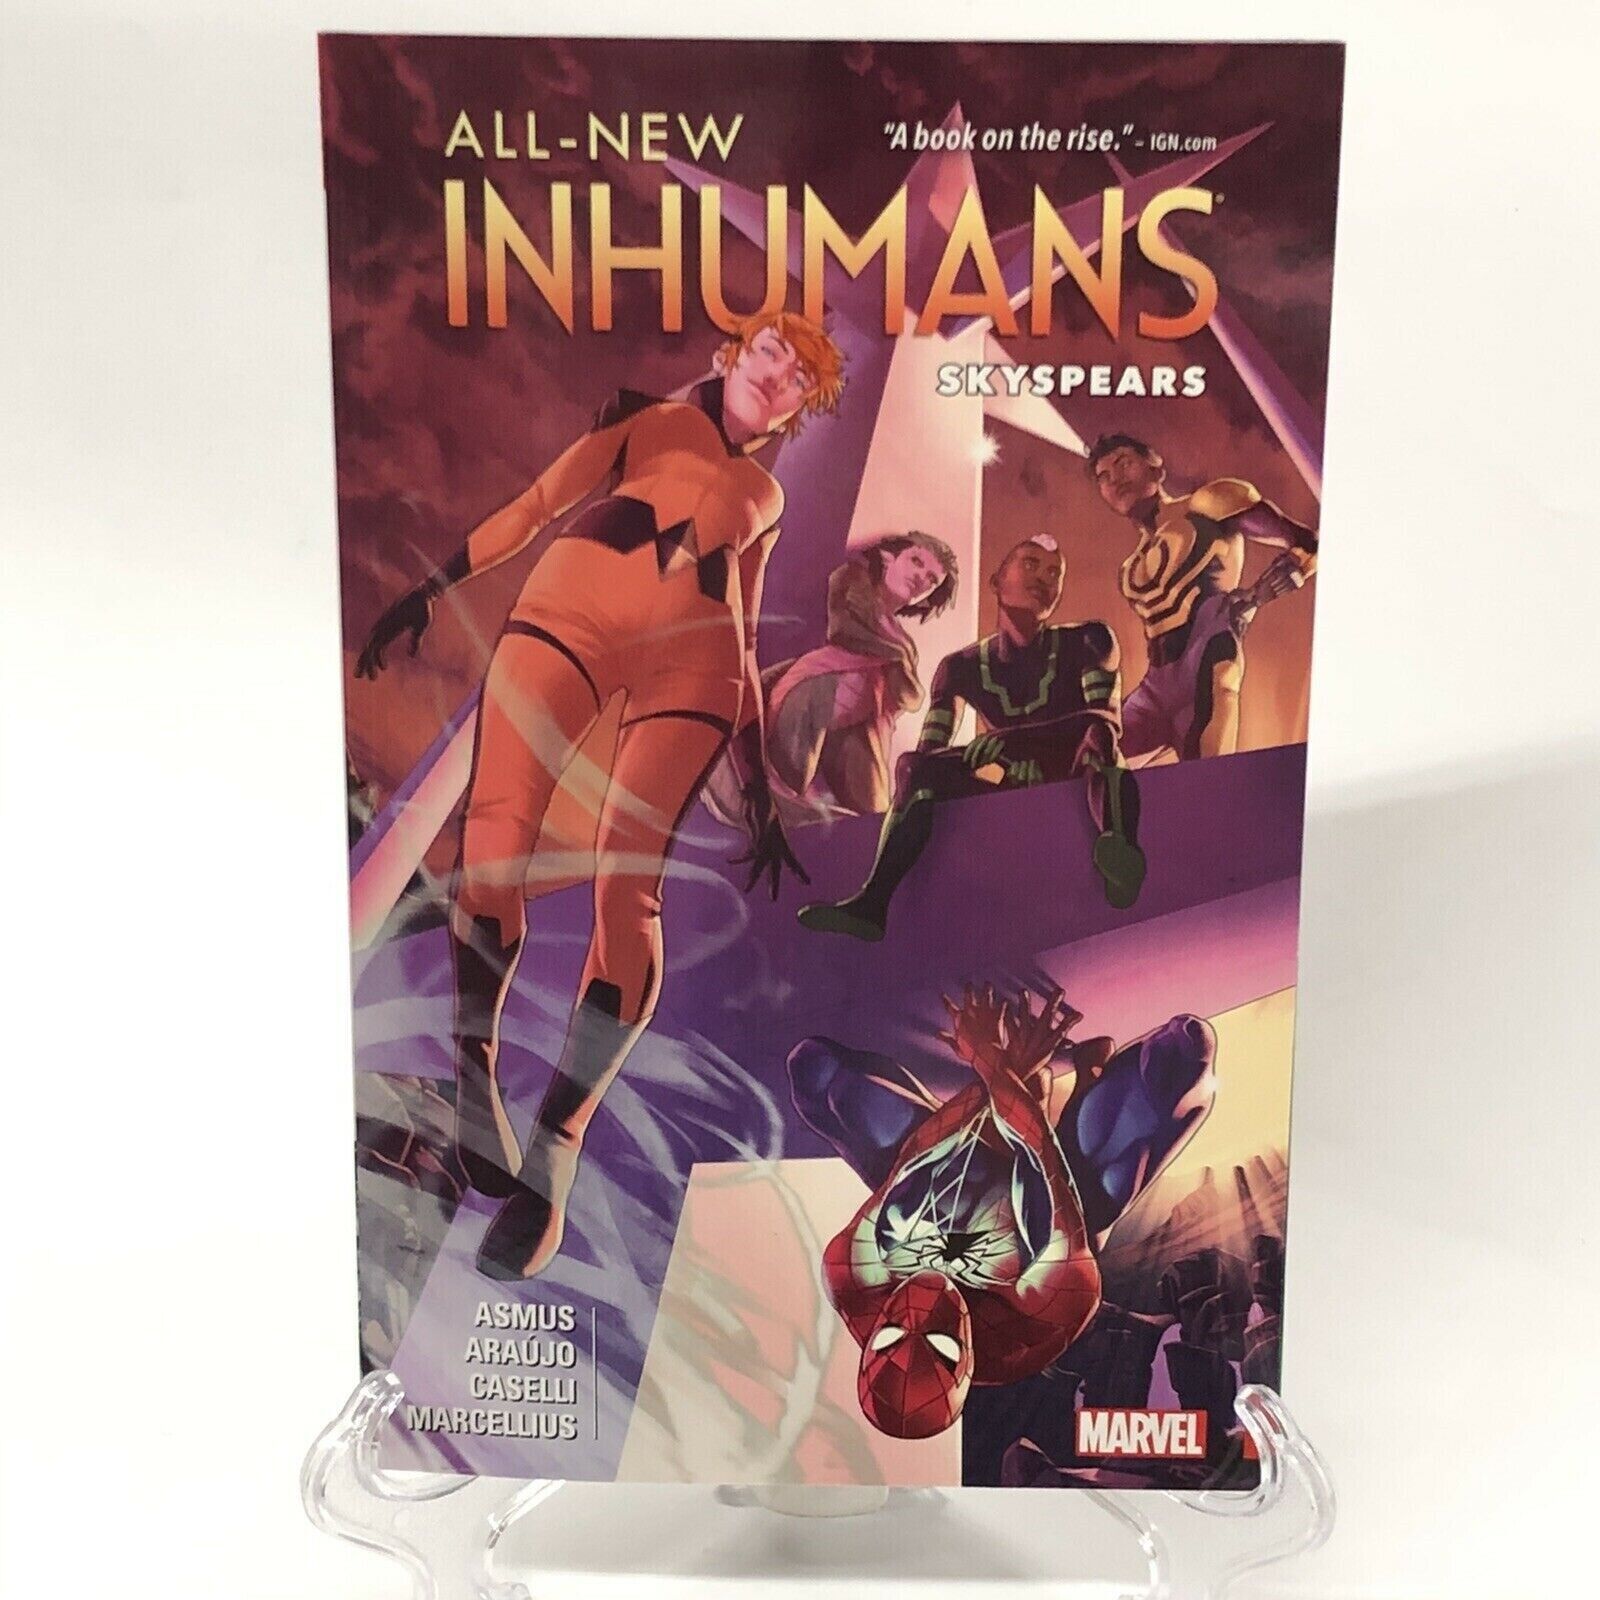 All-New Inhumans Volume 2 Skyspears Collects #5-11 New Marvel Comics TPB